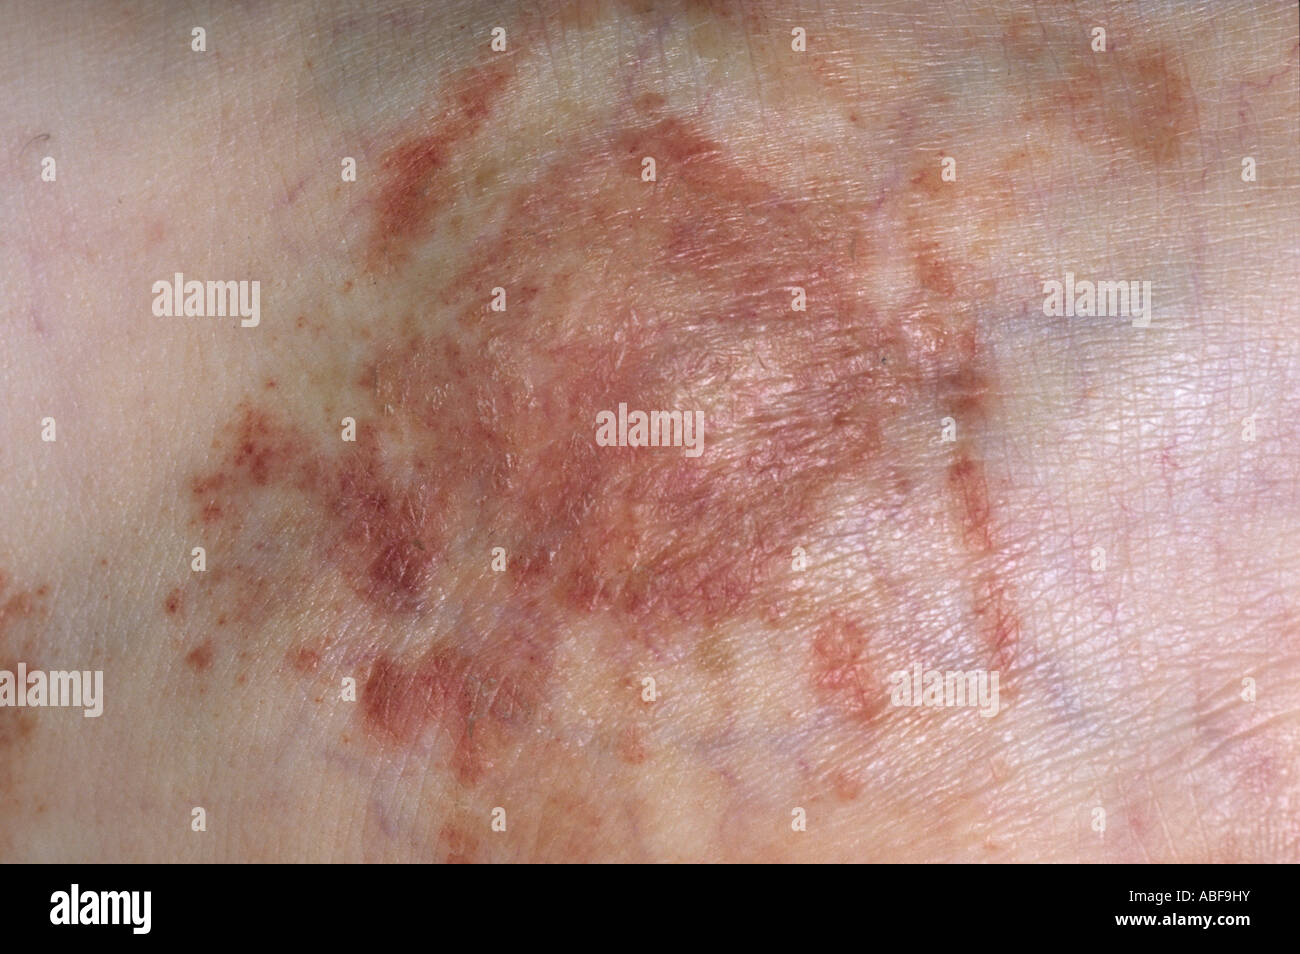 rash of varicose eczema with inflammation scaling & brown discolouration. It is associated with venous insuffiency Stock Photo